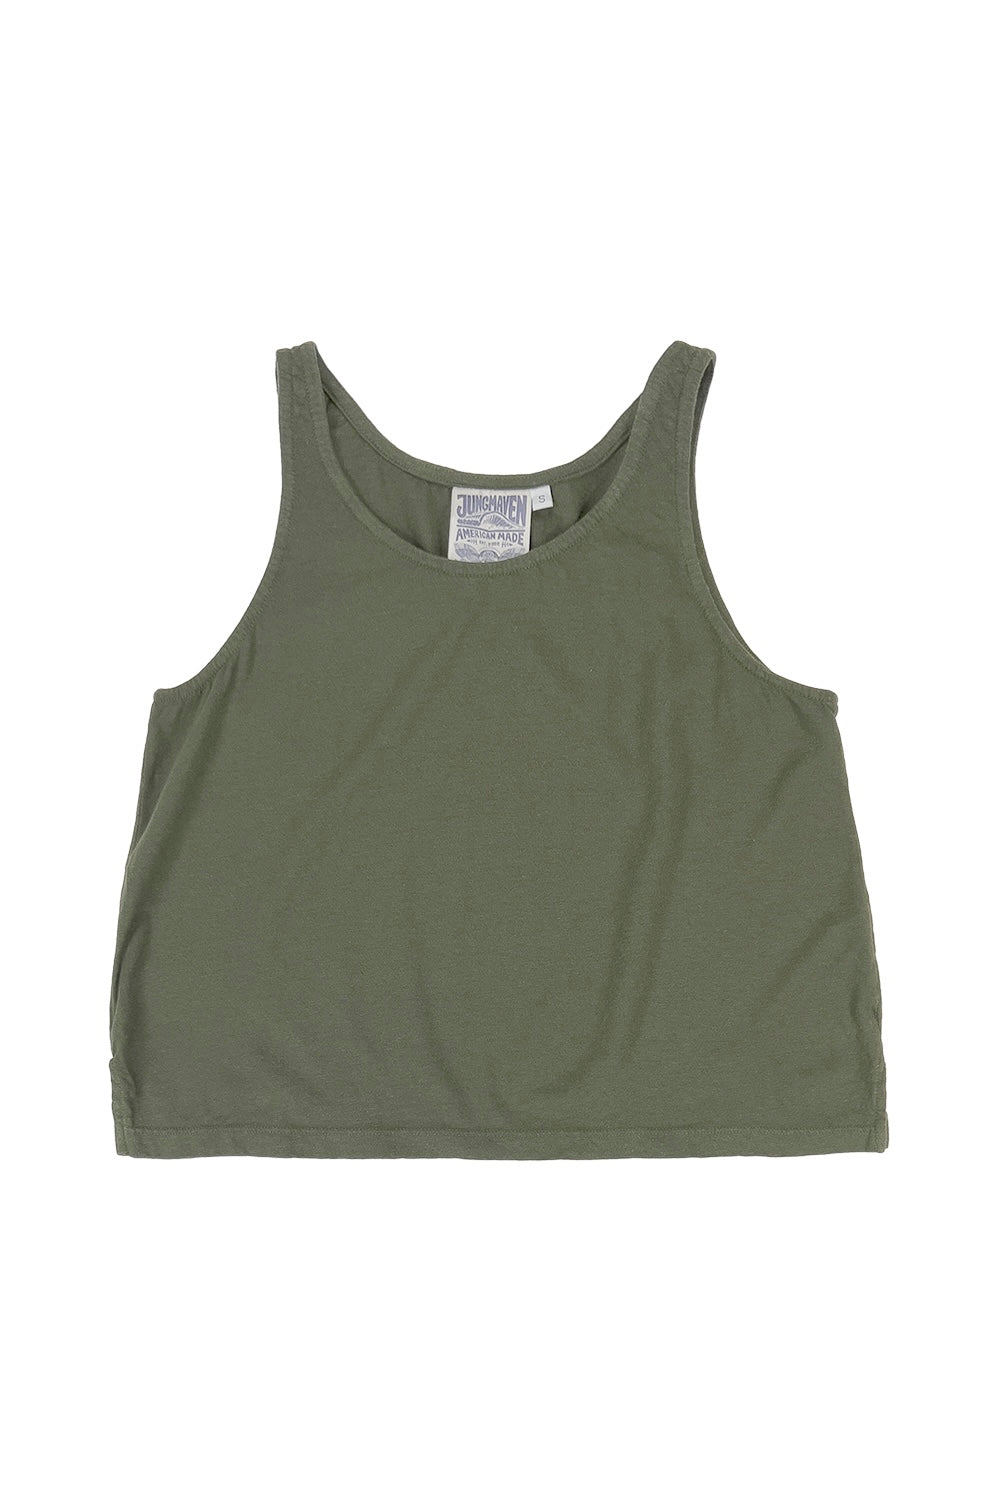 Cropped Tank | Jungmaven Hemp Clothing & Accessories / Color: Olive Green